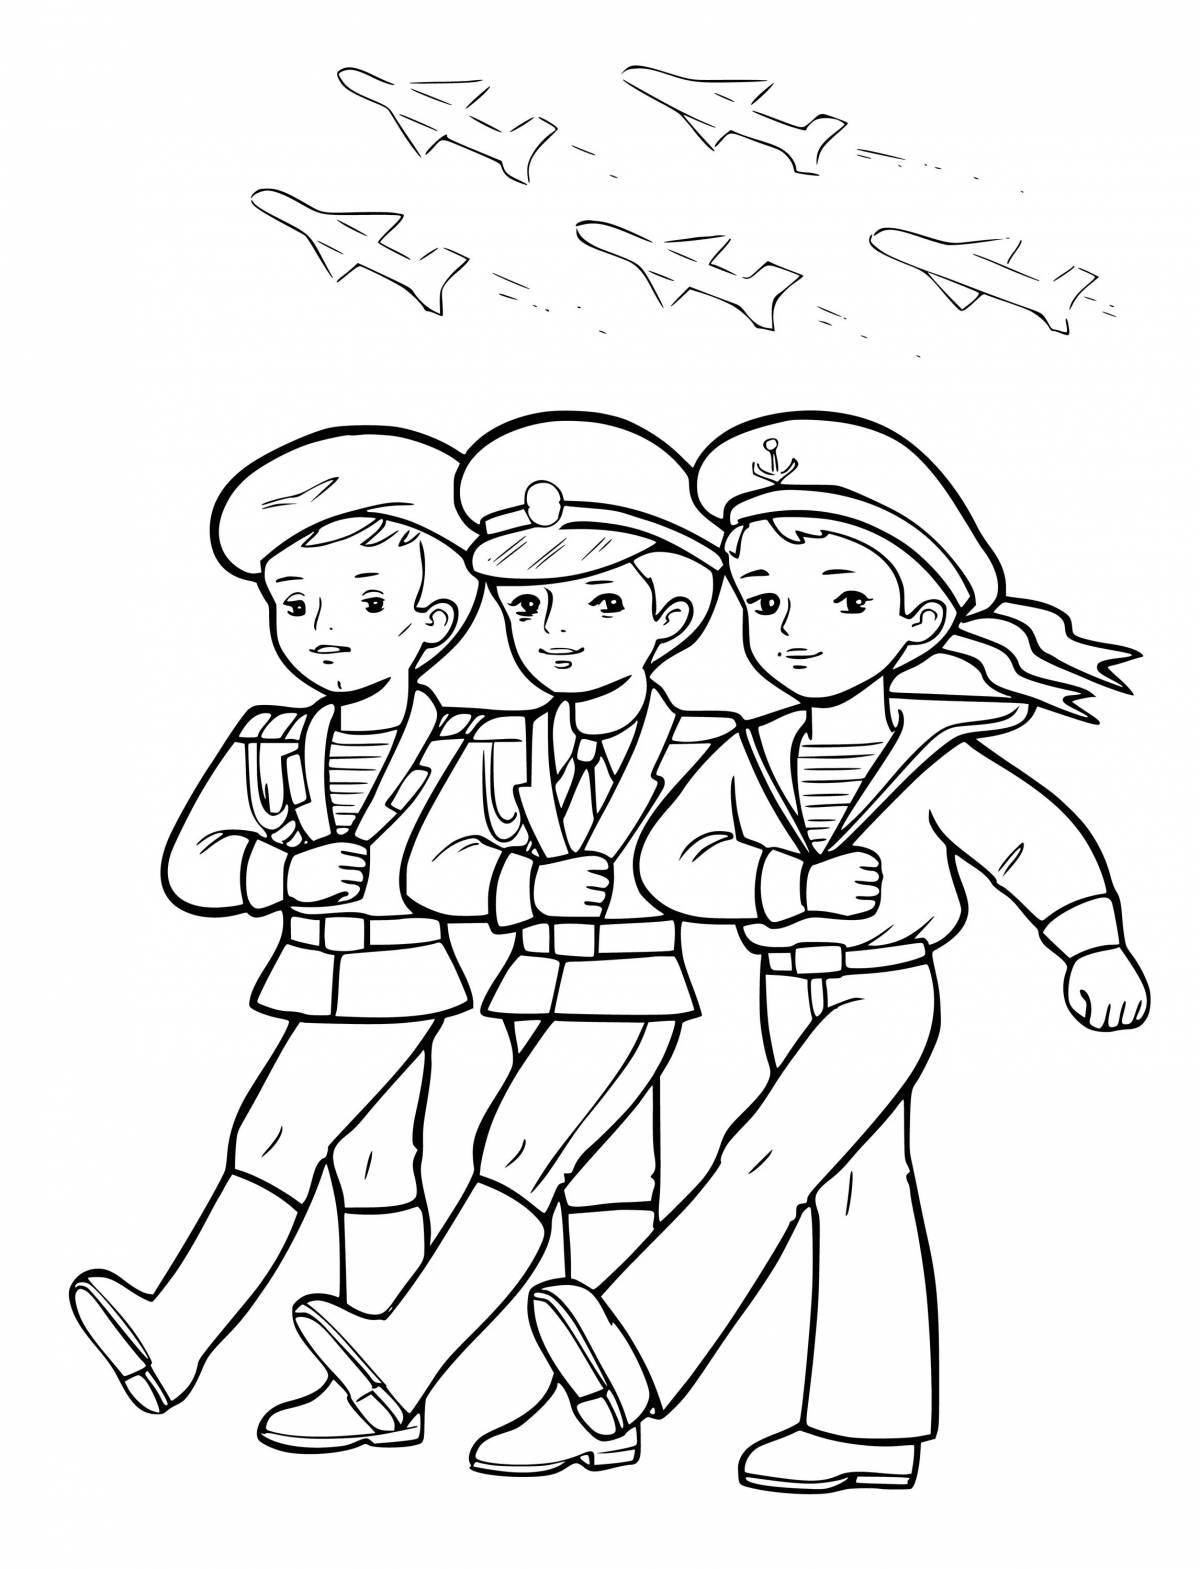 Coloring day glorious defender of the fatherland